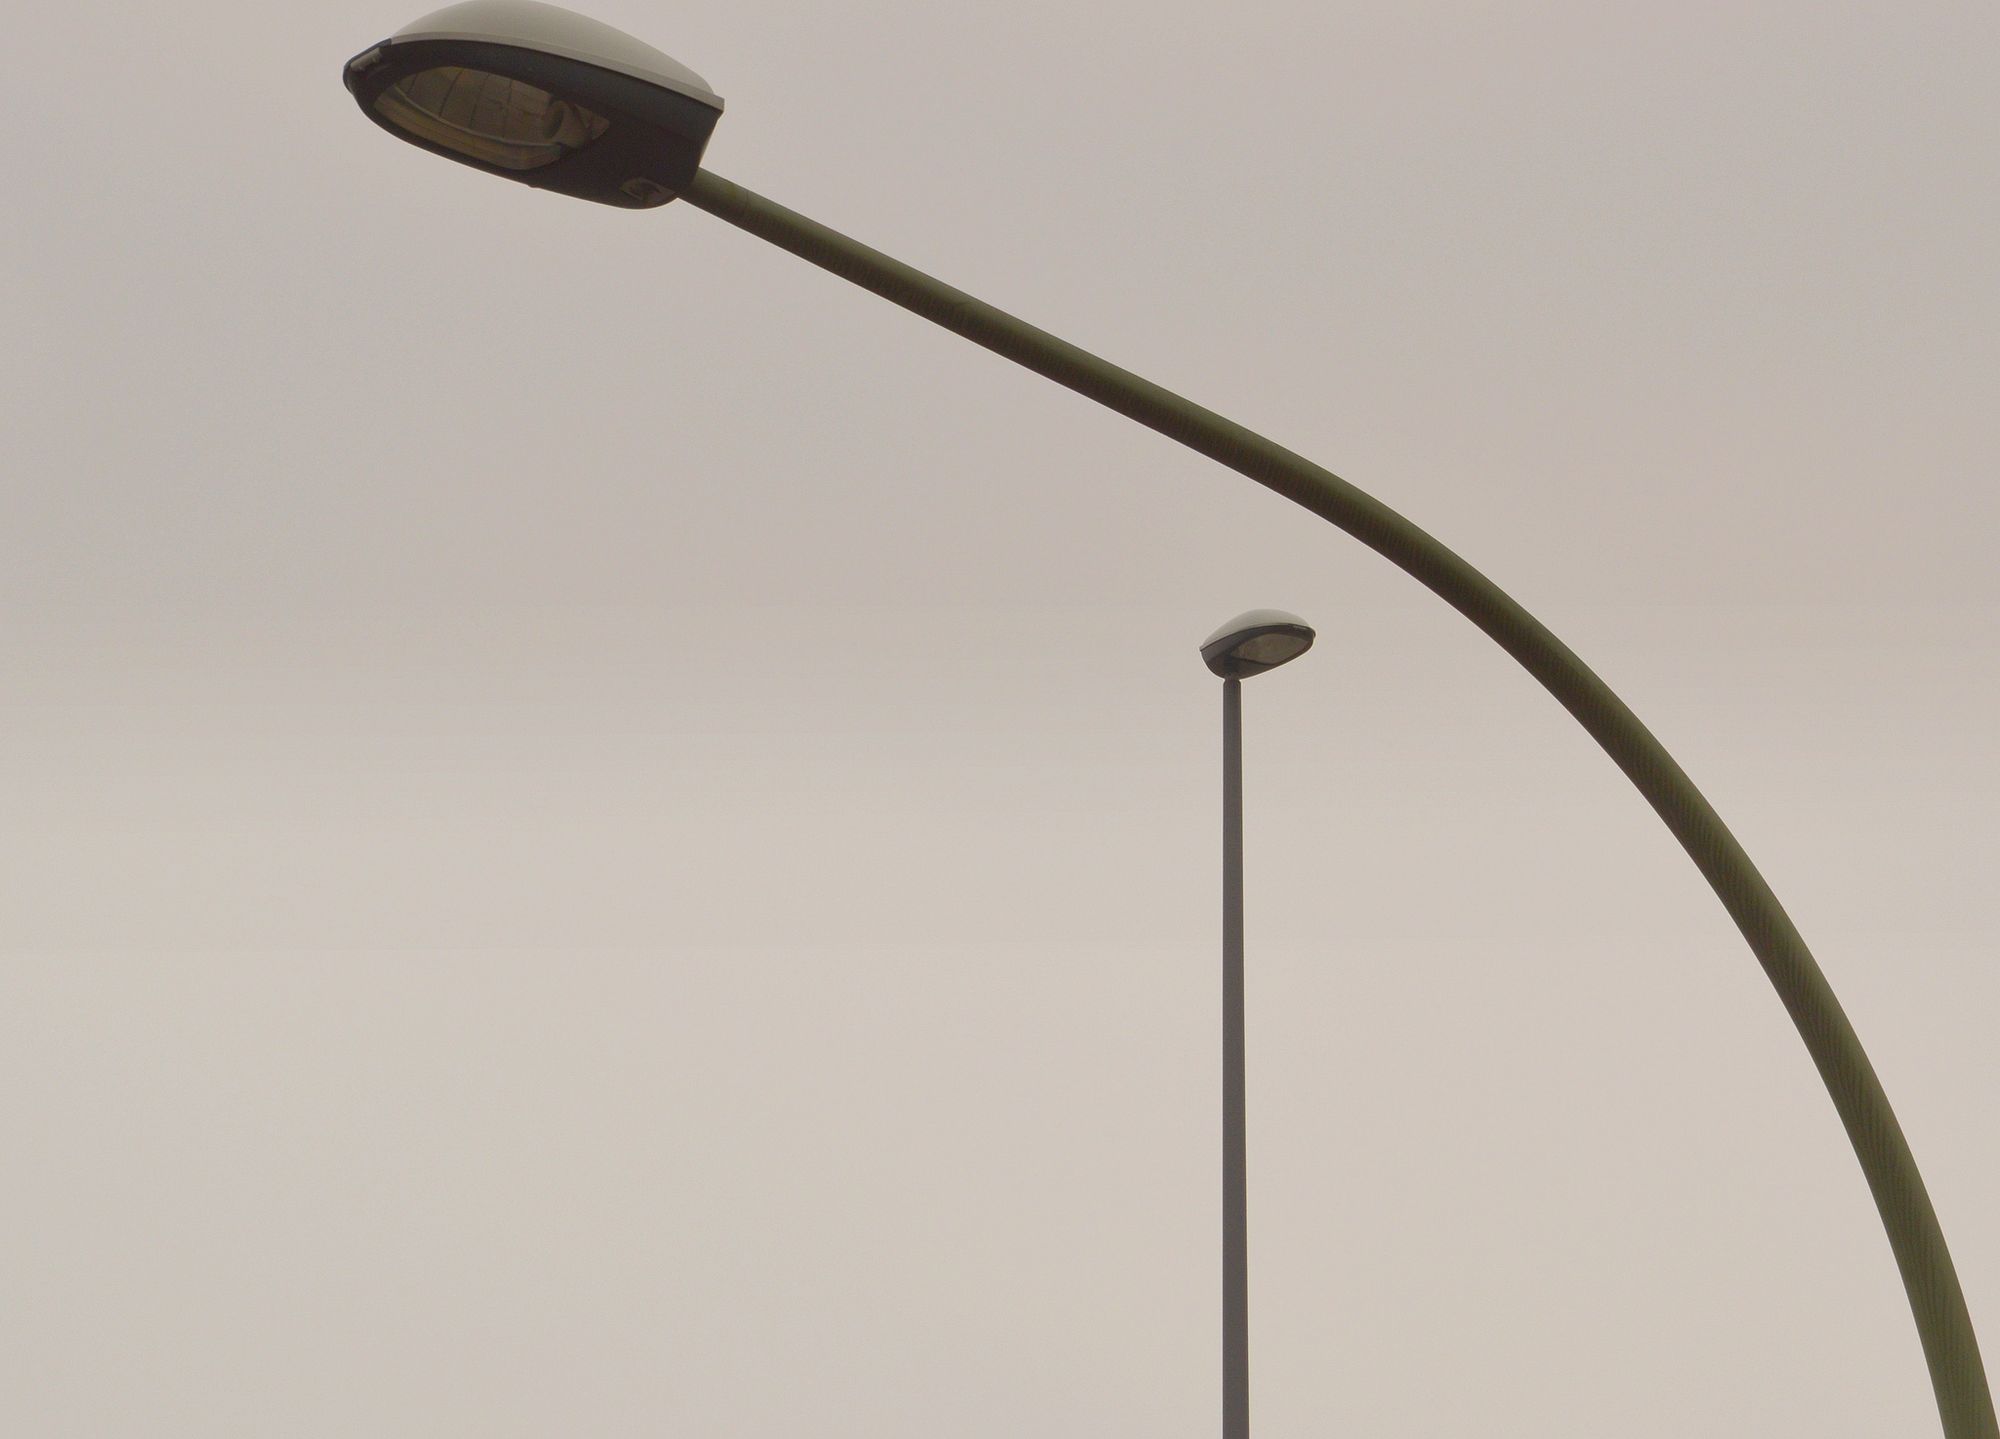 Colton Calls Out DOT For Dangerous Street Lamp Placement On Belt Parkway